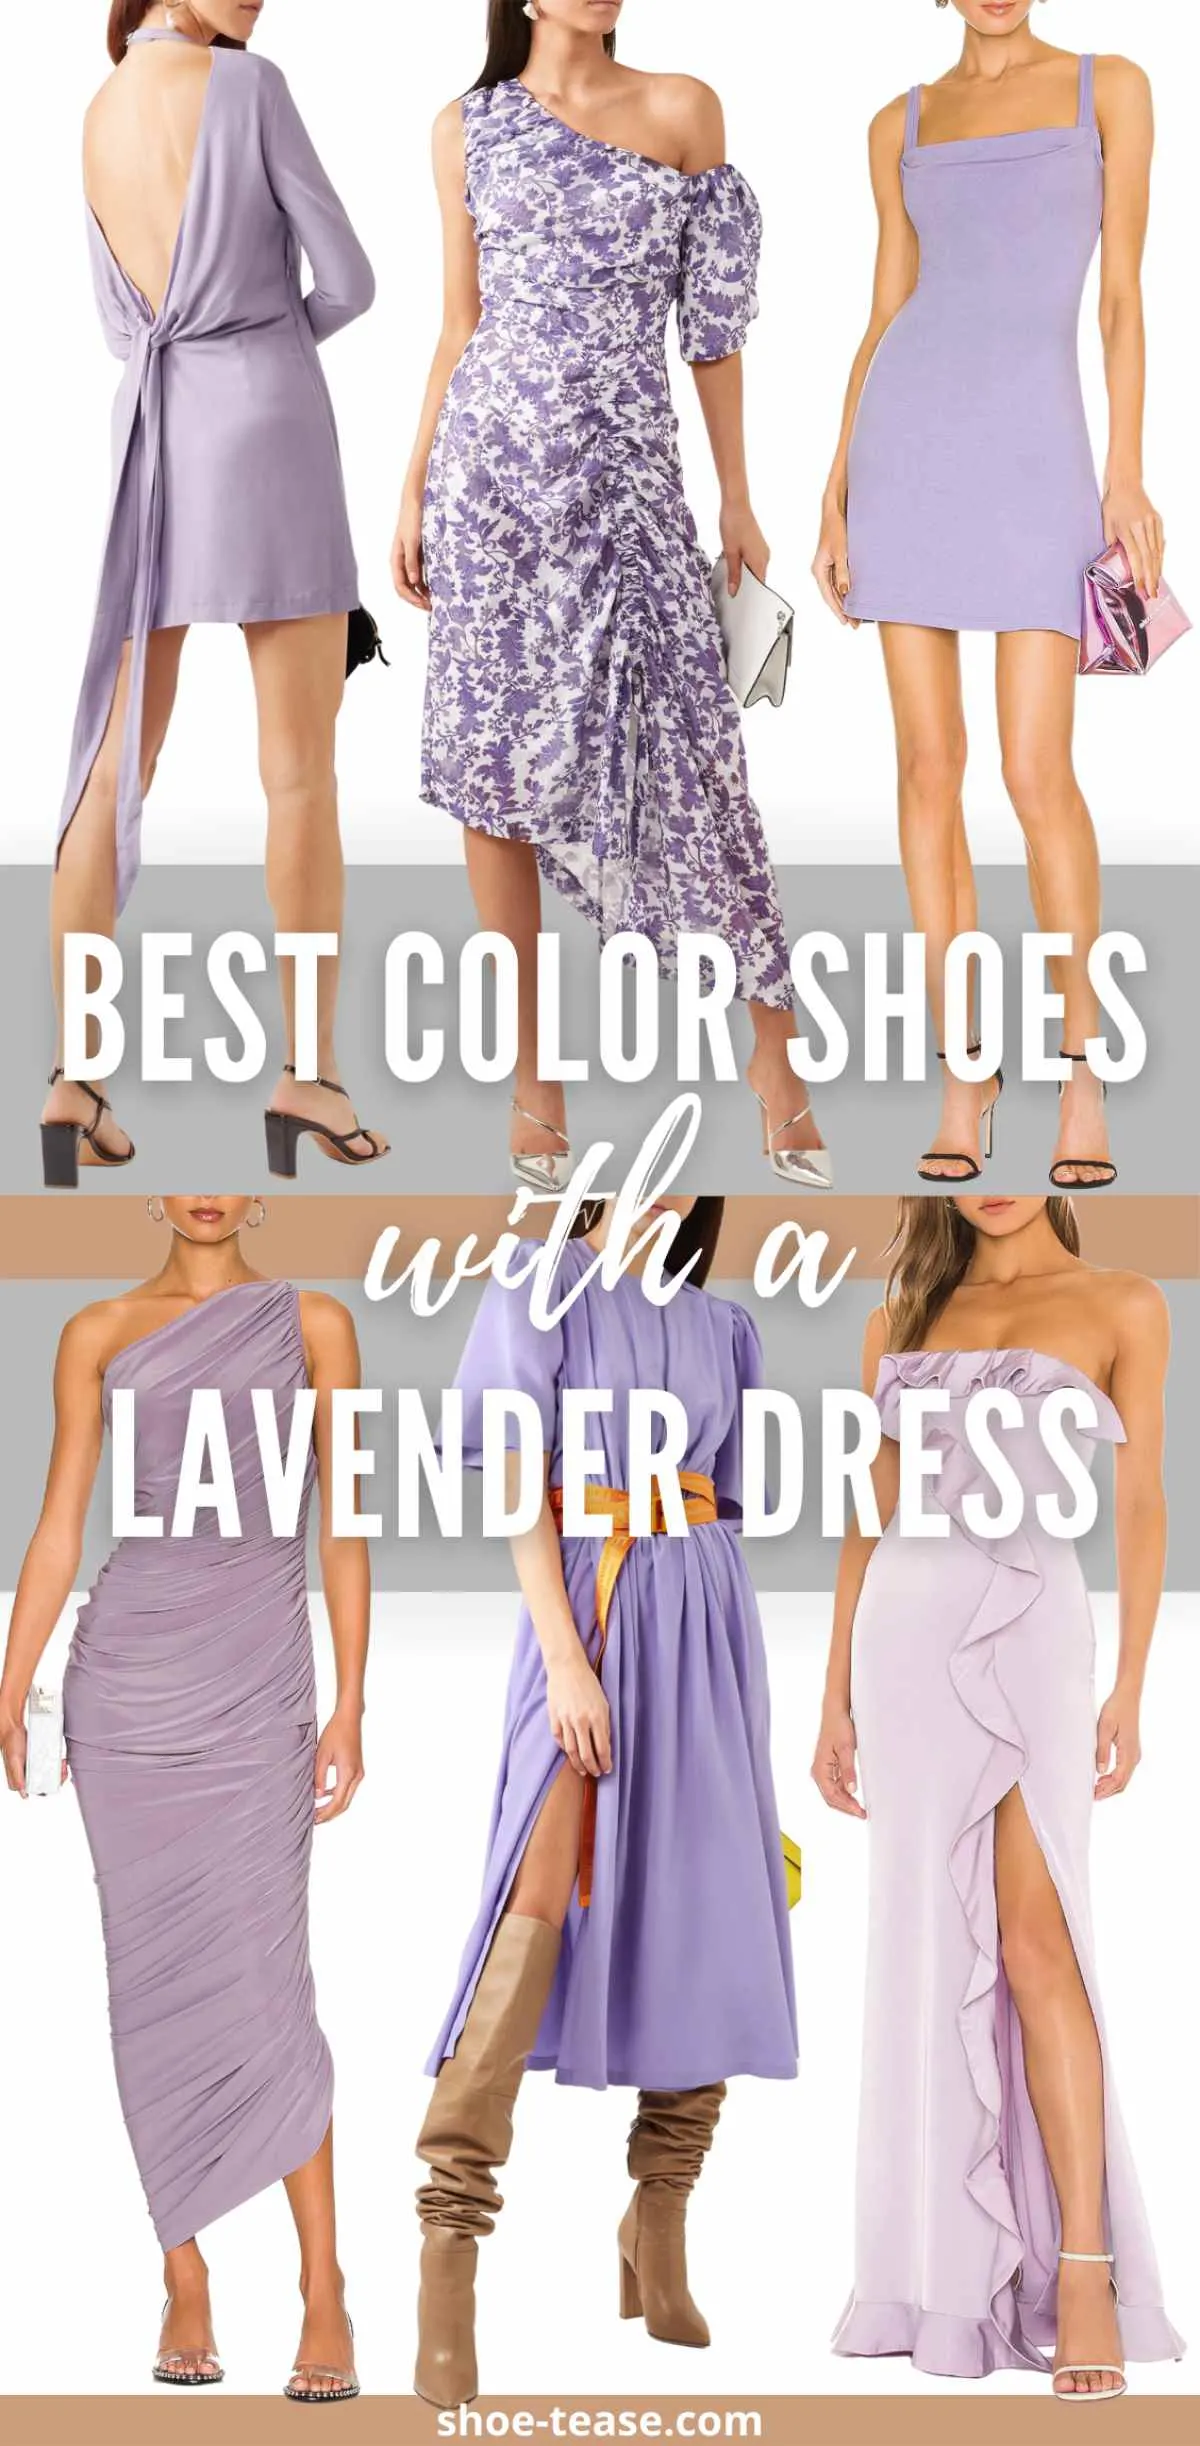 What Color Shoes Go With A Purple Dress?